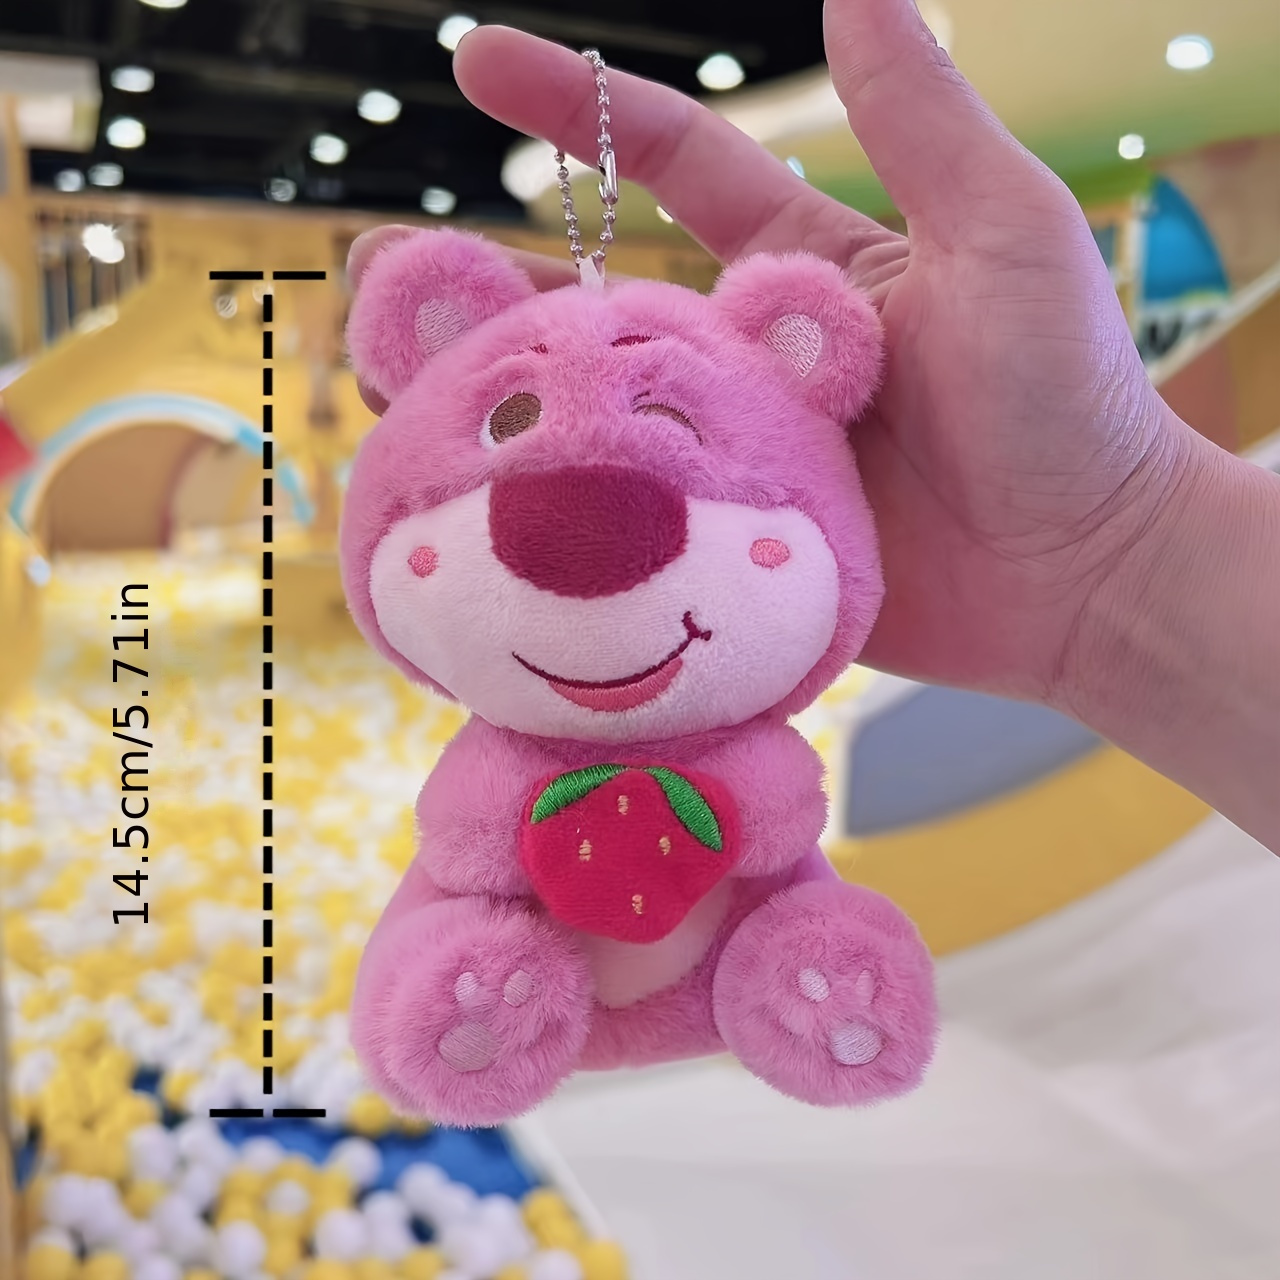  MINISO Lotso Collection Sweet Lotso Sitting Plush Toy Disney  100 Years Anniversary Stuffed Animals & Teddy Bears : Toys & Games